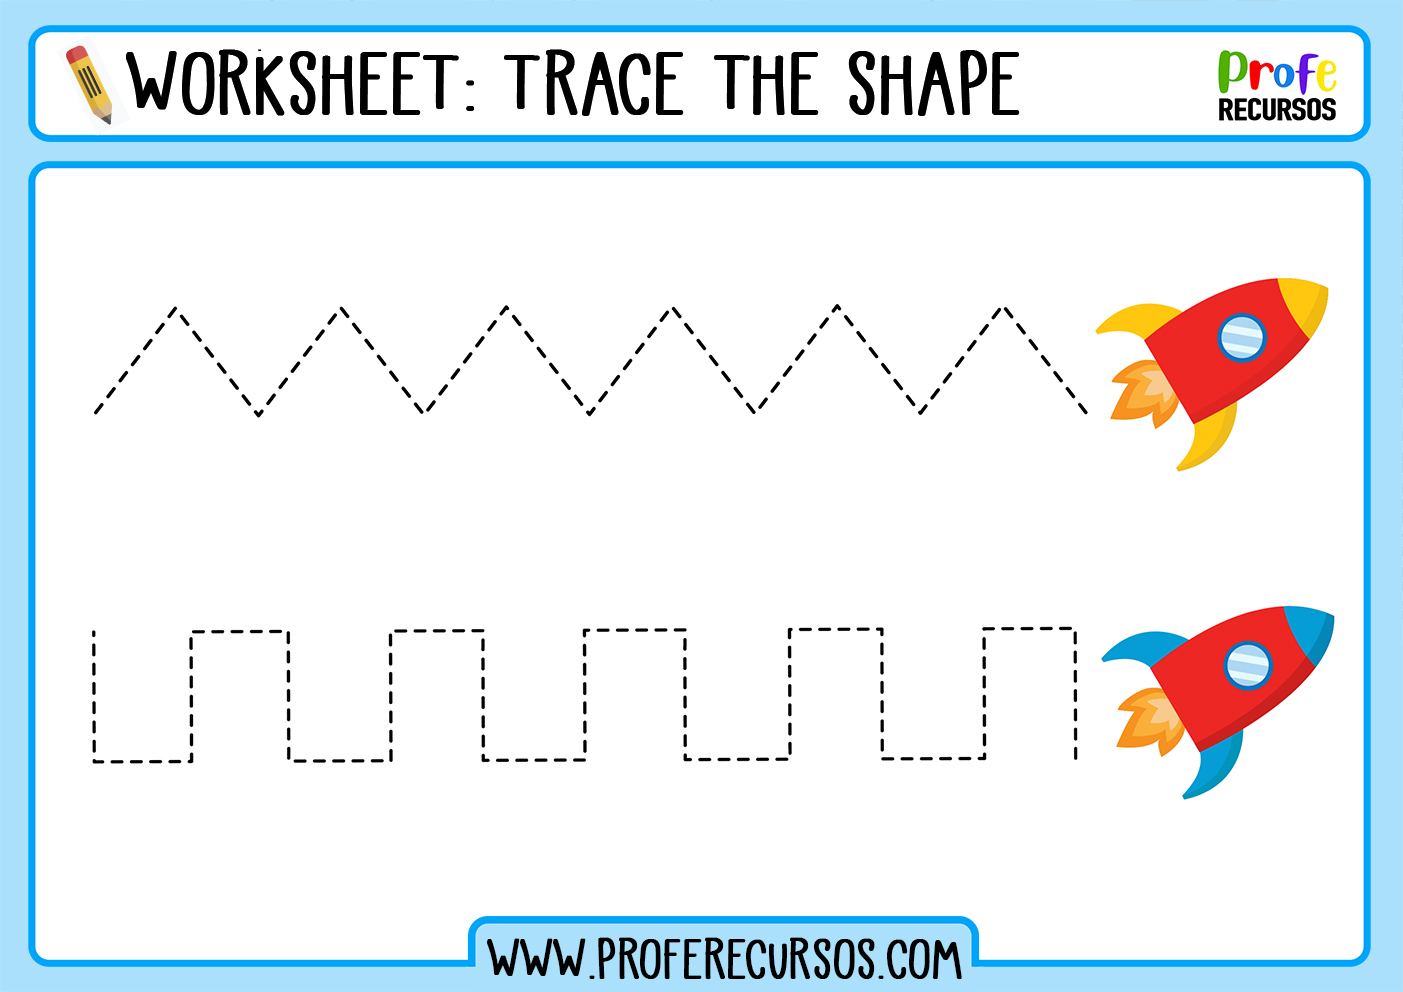 Tracing exercises for toddlers